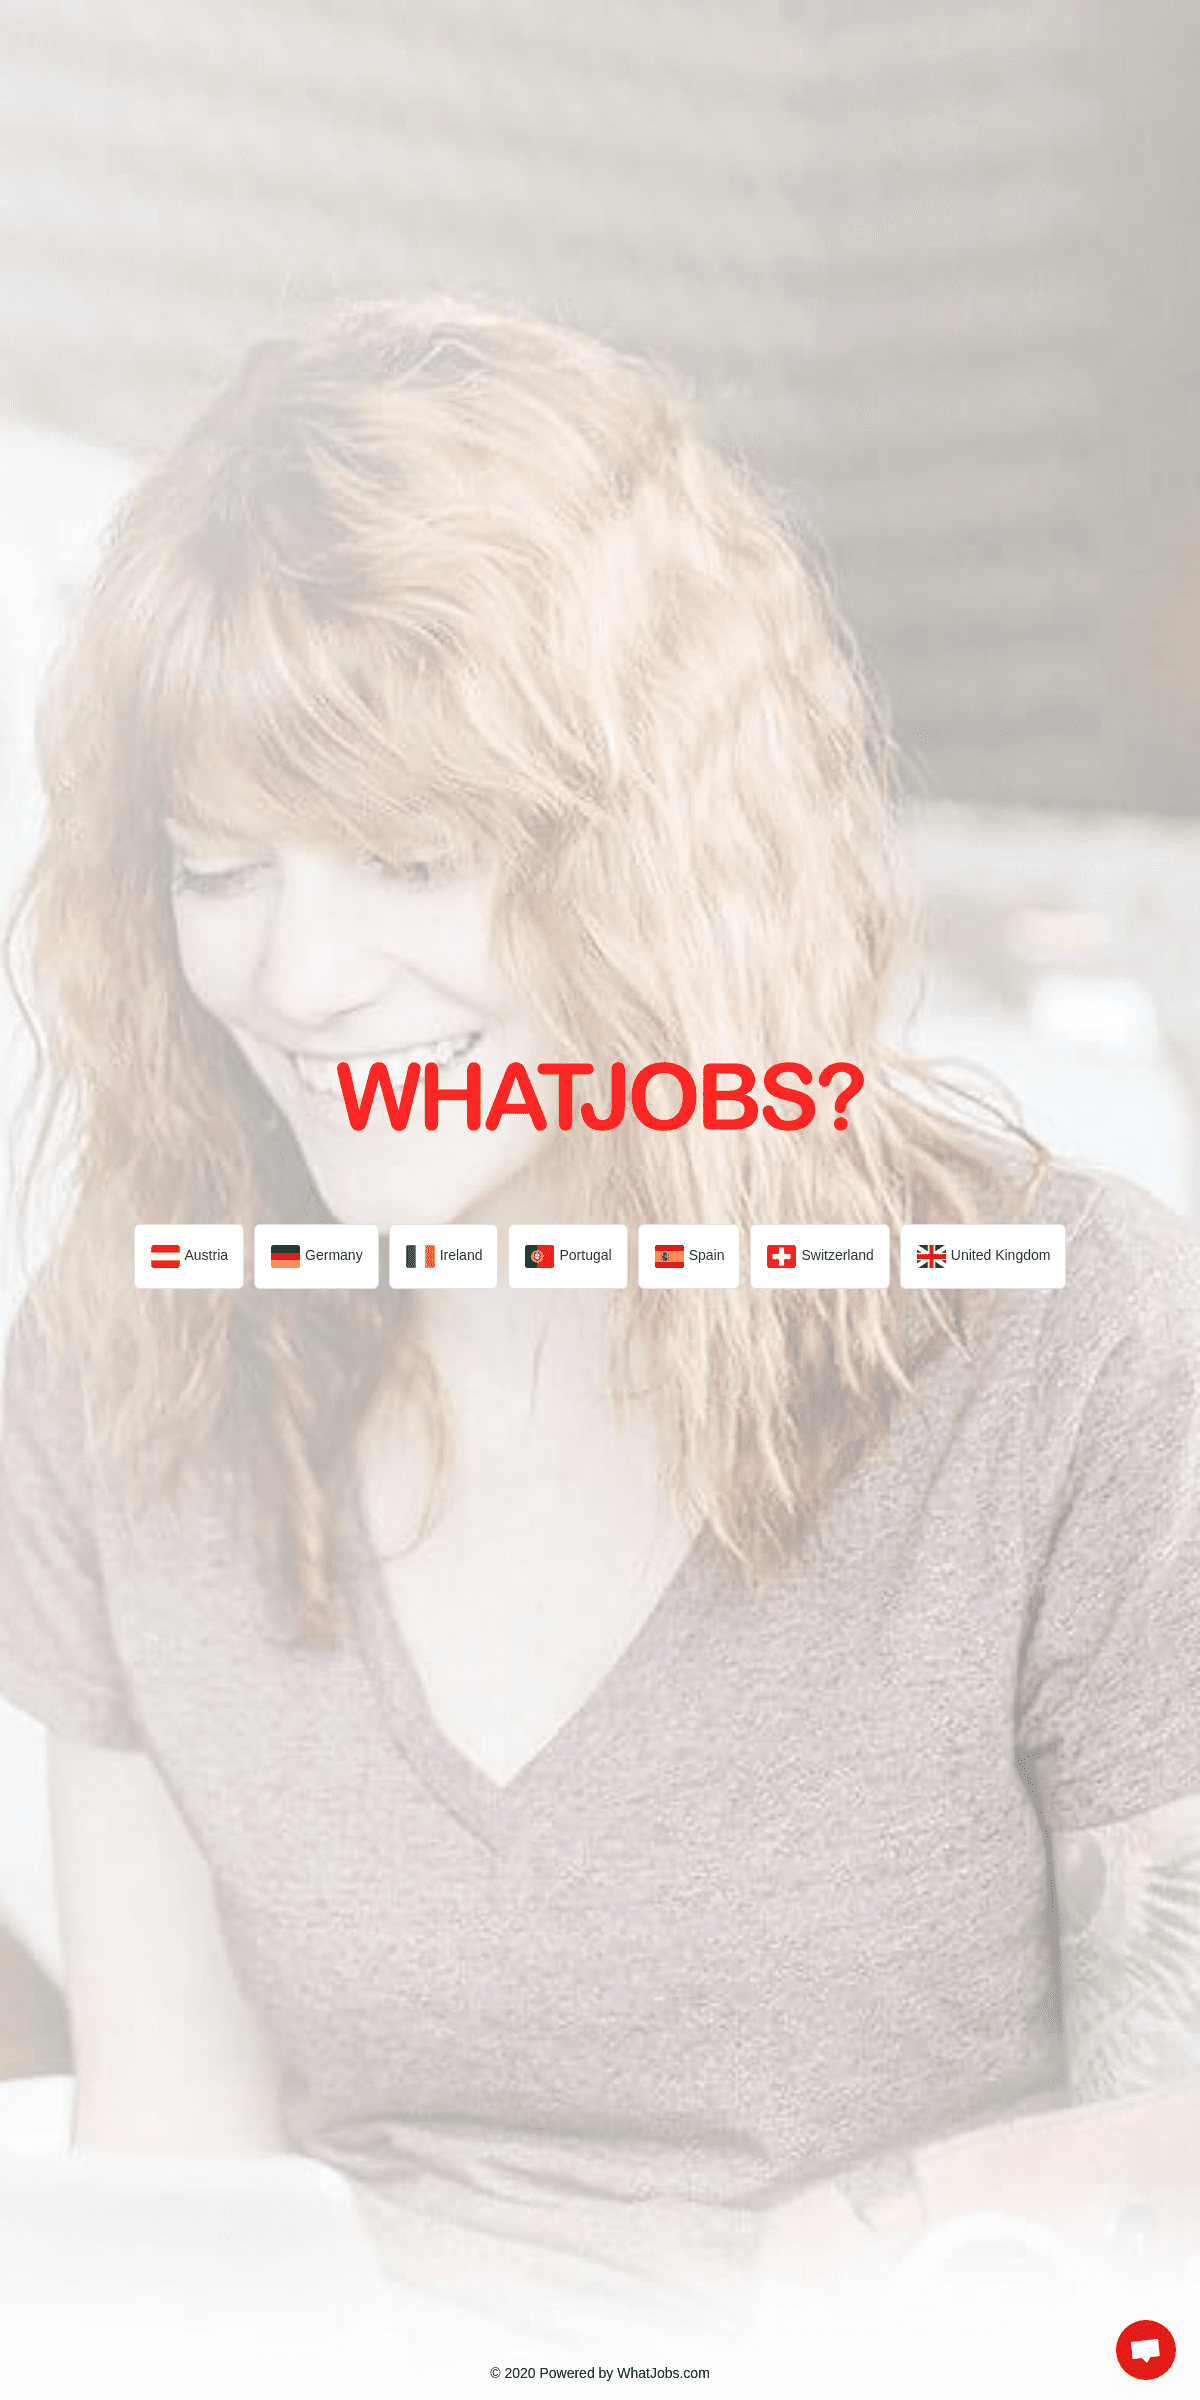 A complete backup of whatjobs.com